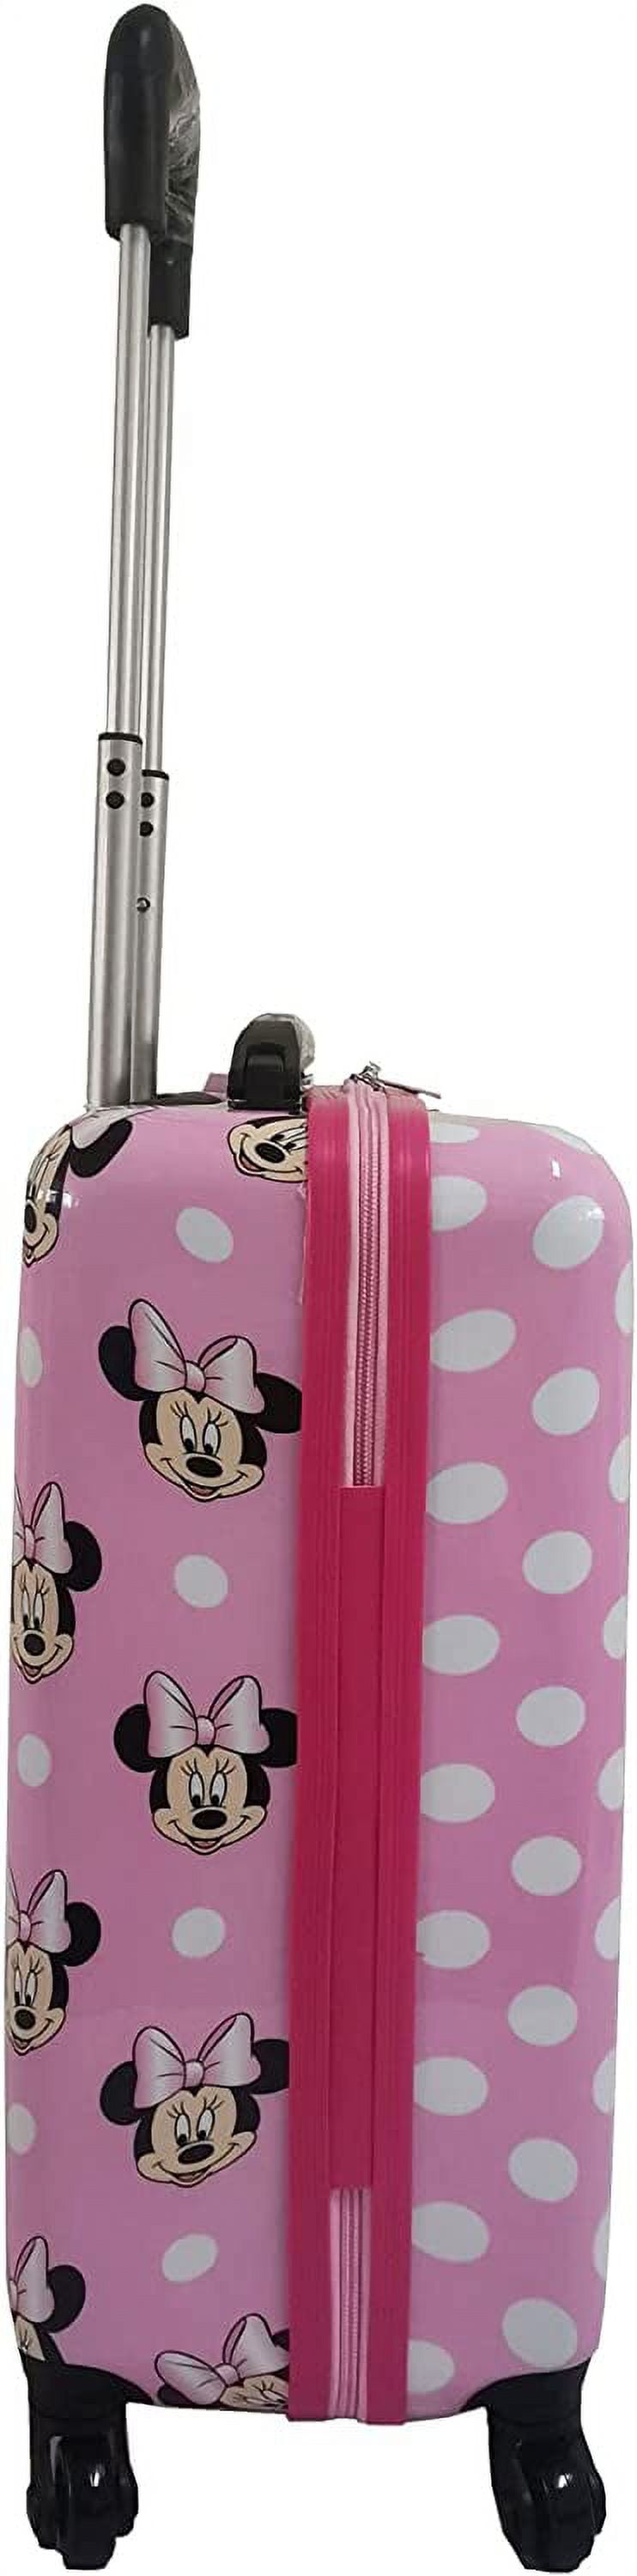 Fast Forward Kid’s Licensed Hard-Side 20” Spinner Luggage Carry-On Suitcase  and Beauty Case Set, Multicolored, Carry-On 20, Hello Kitty